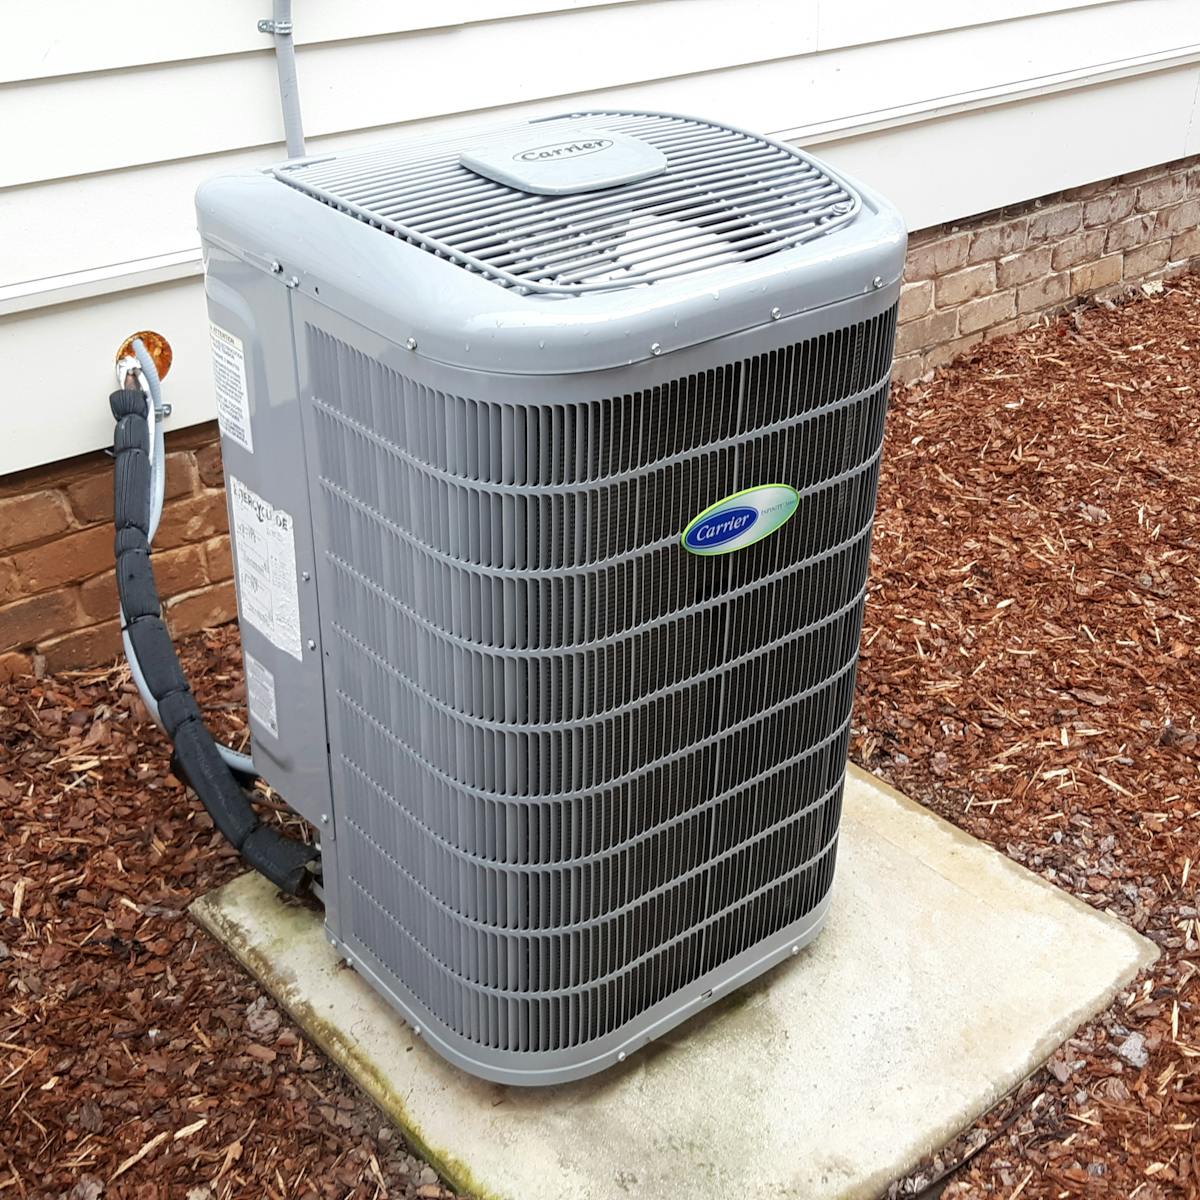 Do Space Heaters Consume More Power Than Air Conditioners?